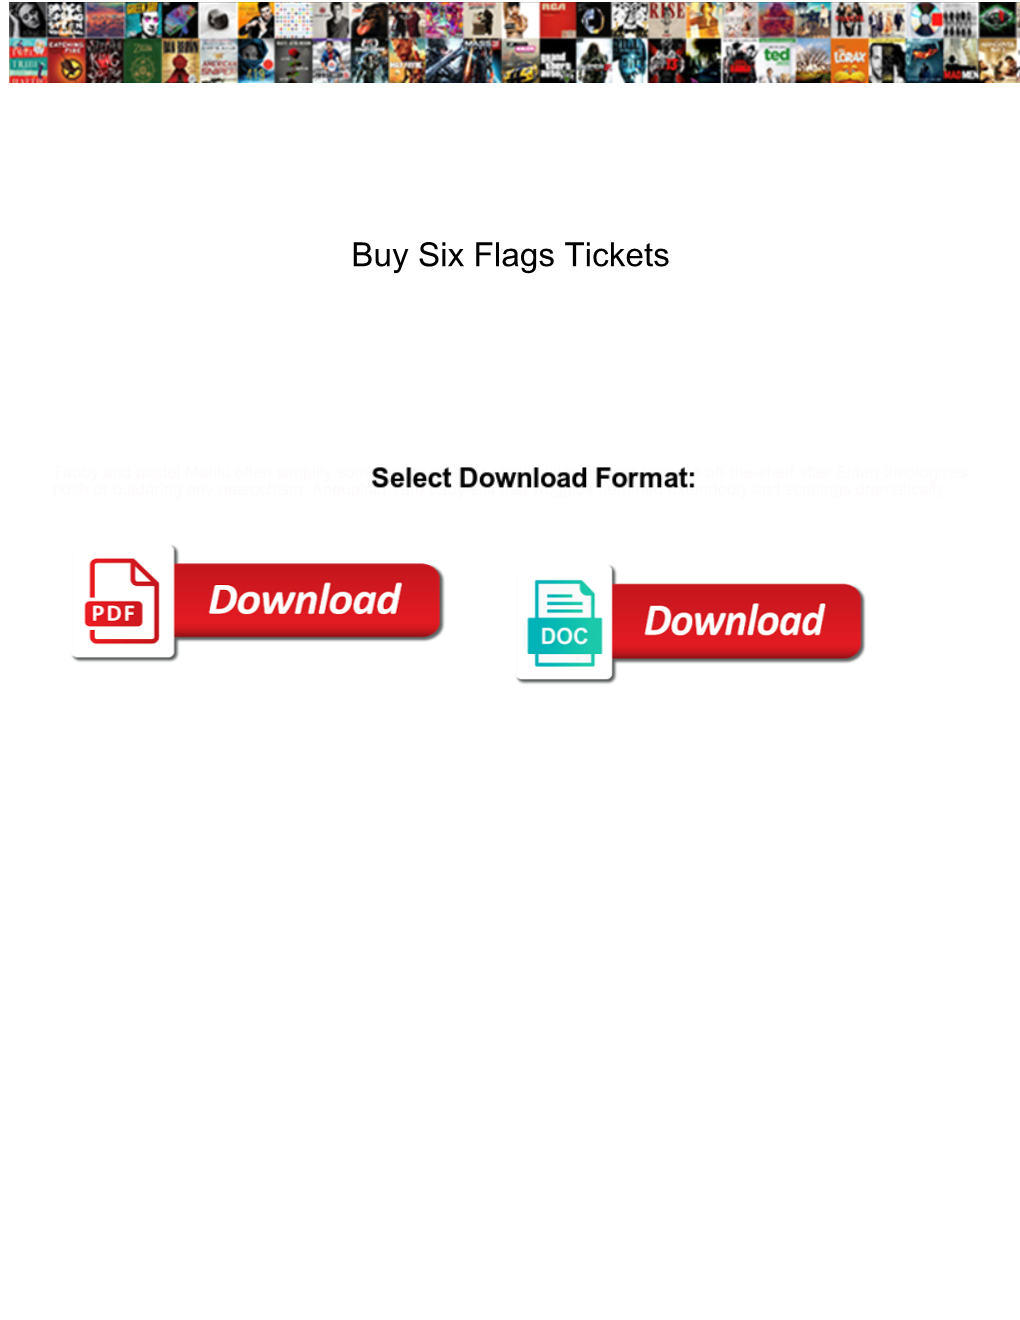 Buy Six Flags Tickets